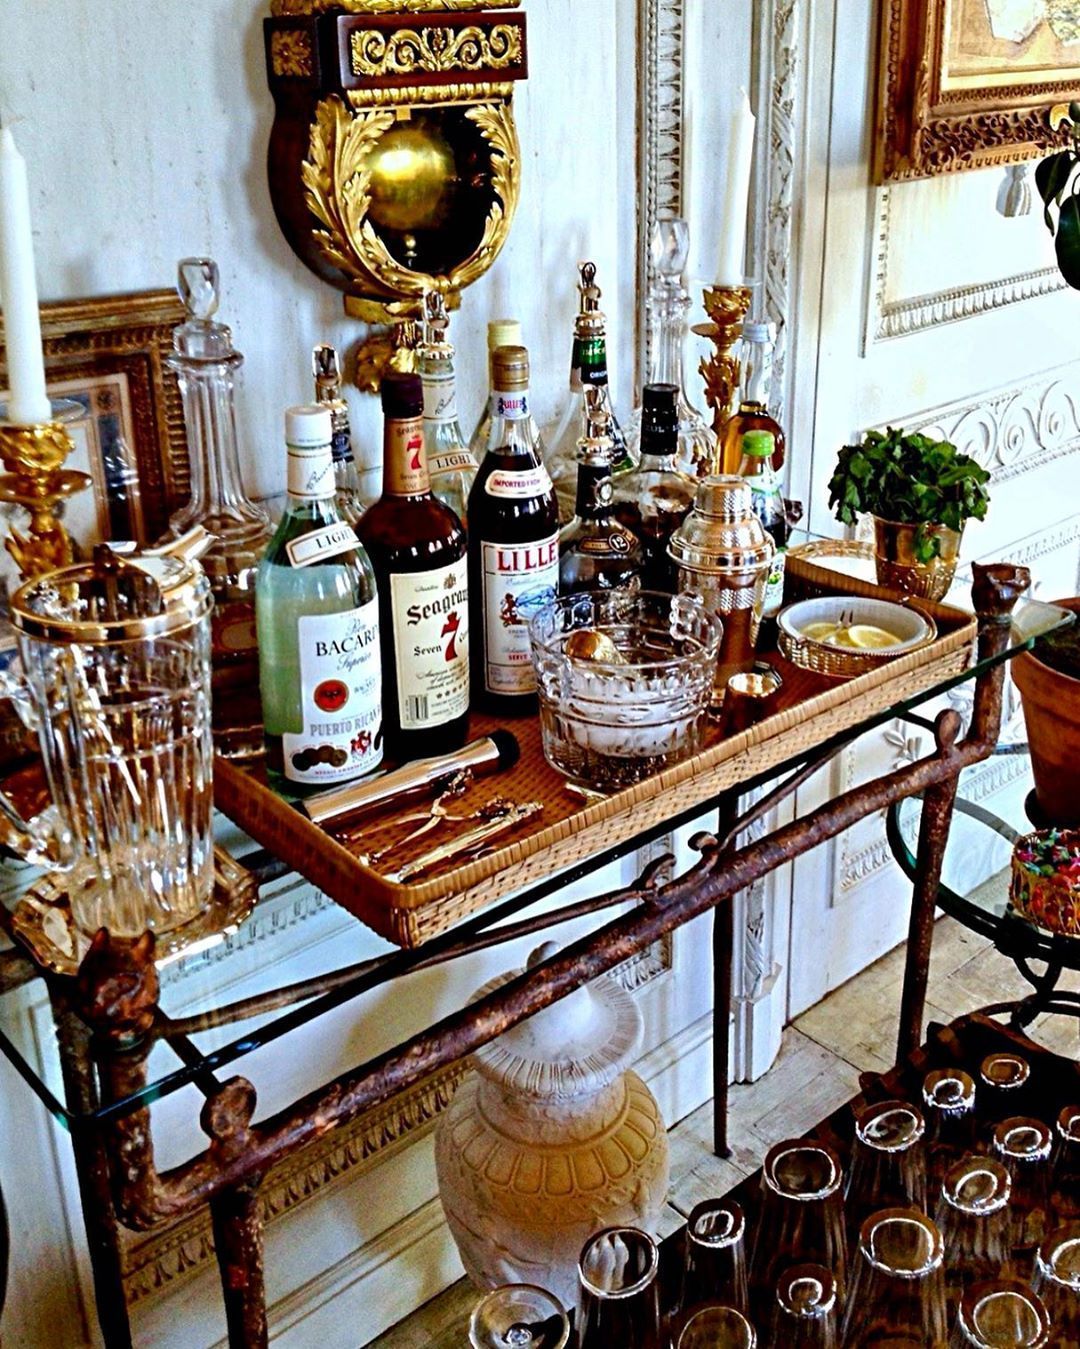 Stacey Bewkes on Instagram: “Cheers to the weekend with a #fbf to the most elegant bar set up in @howardslatkin former Fifth Avenue apartment!” - Stacey Bewkes on Instagram: “Cheers to the weekend with a #fbf to the most elegant bar set up in @howardslatkin former Fifth Avenue apartment!” -   17 beauty Bar set up ideas